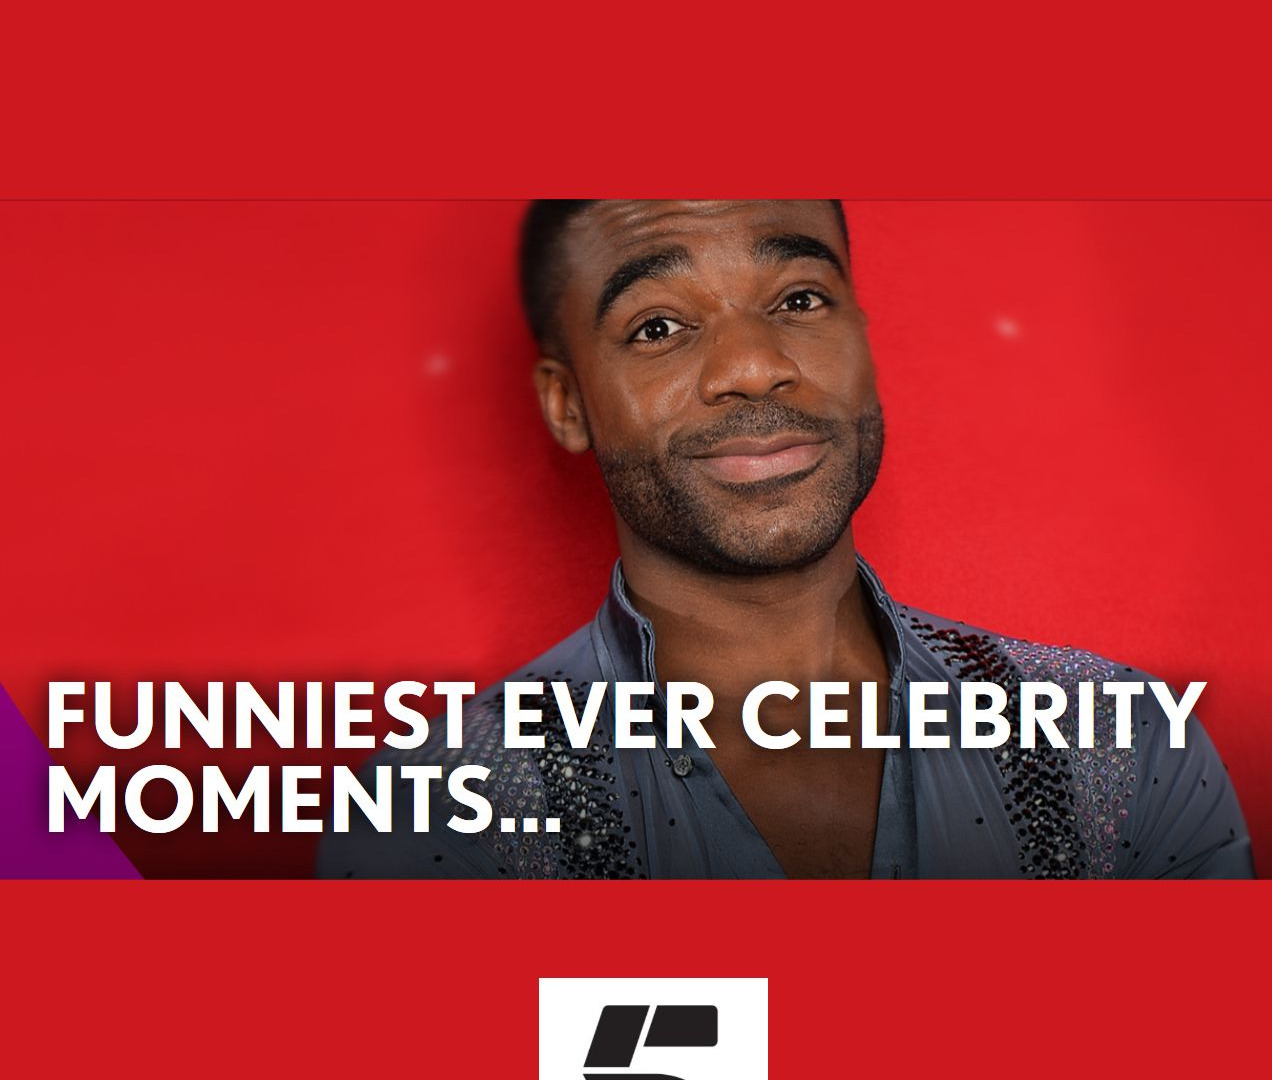 Show Funniest Ever Celebrity Moments